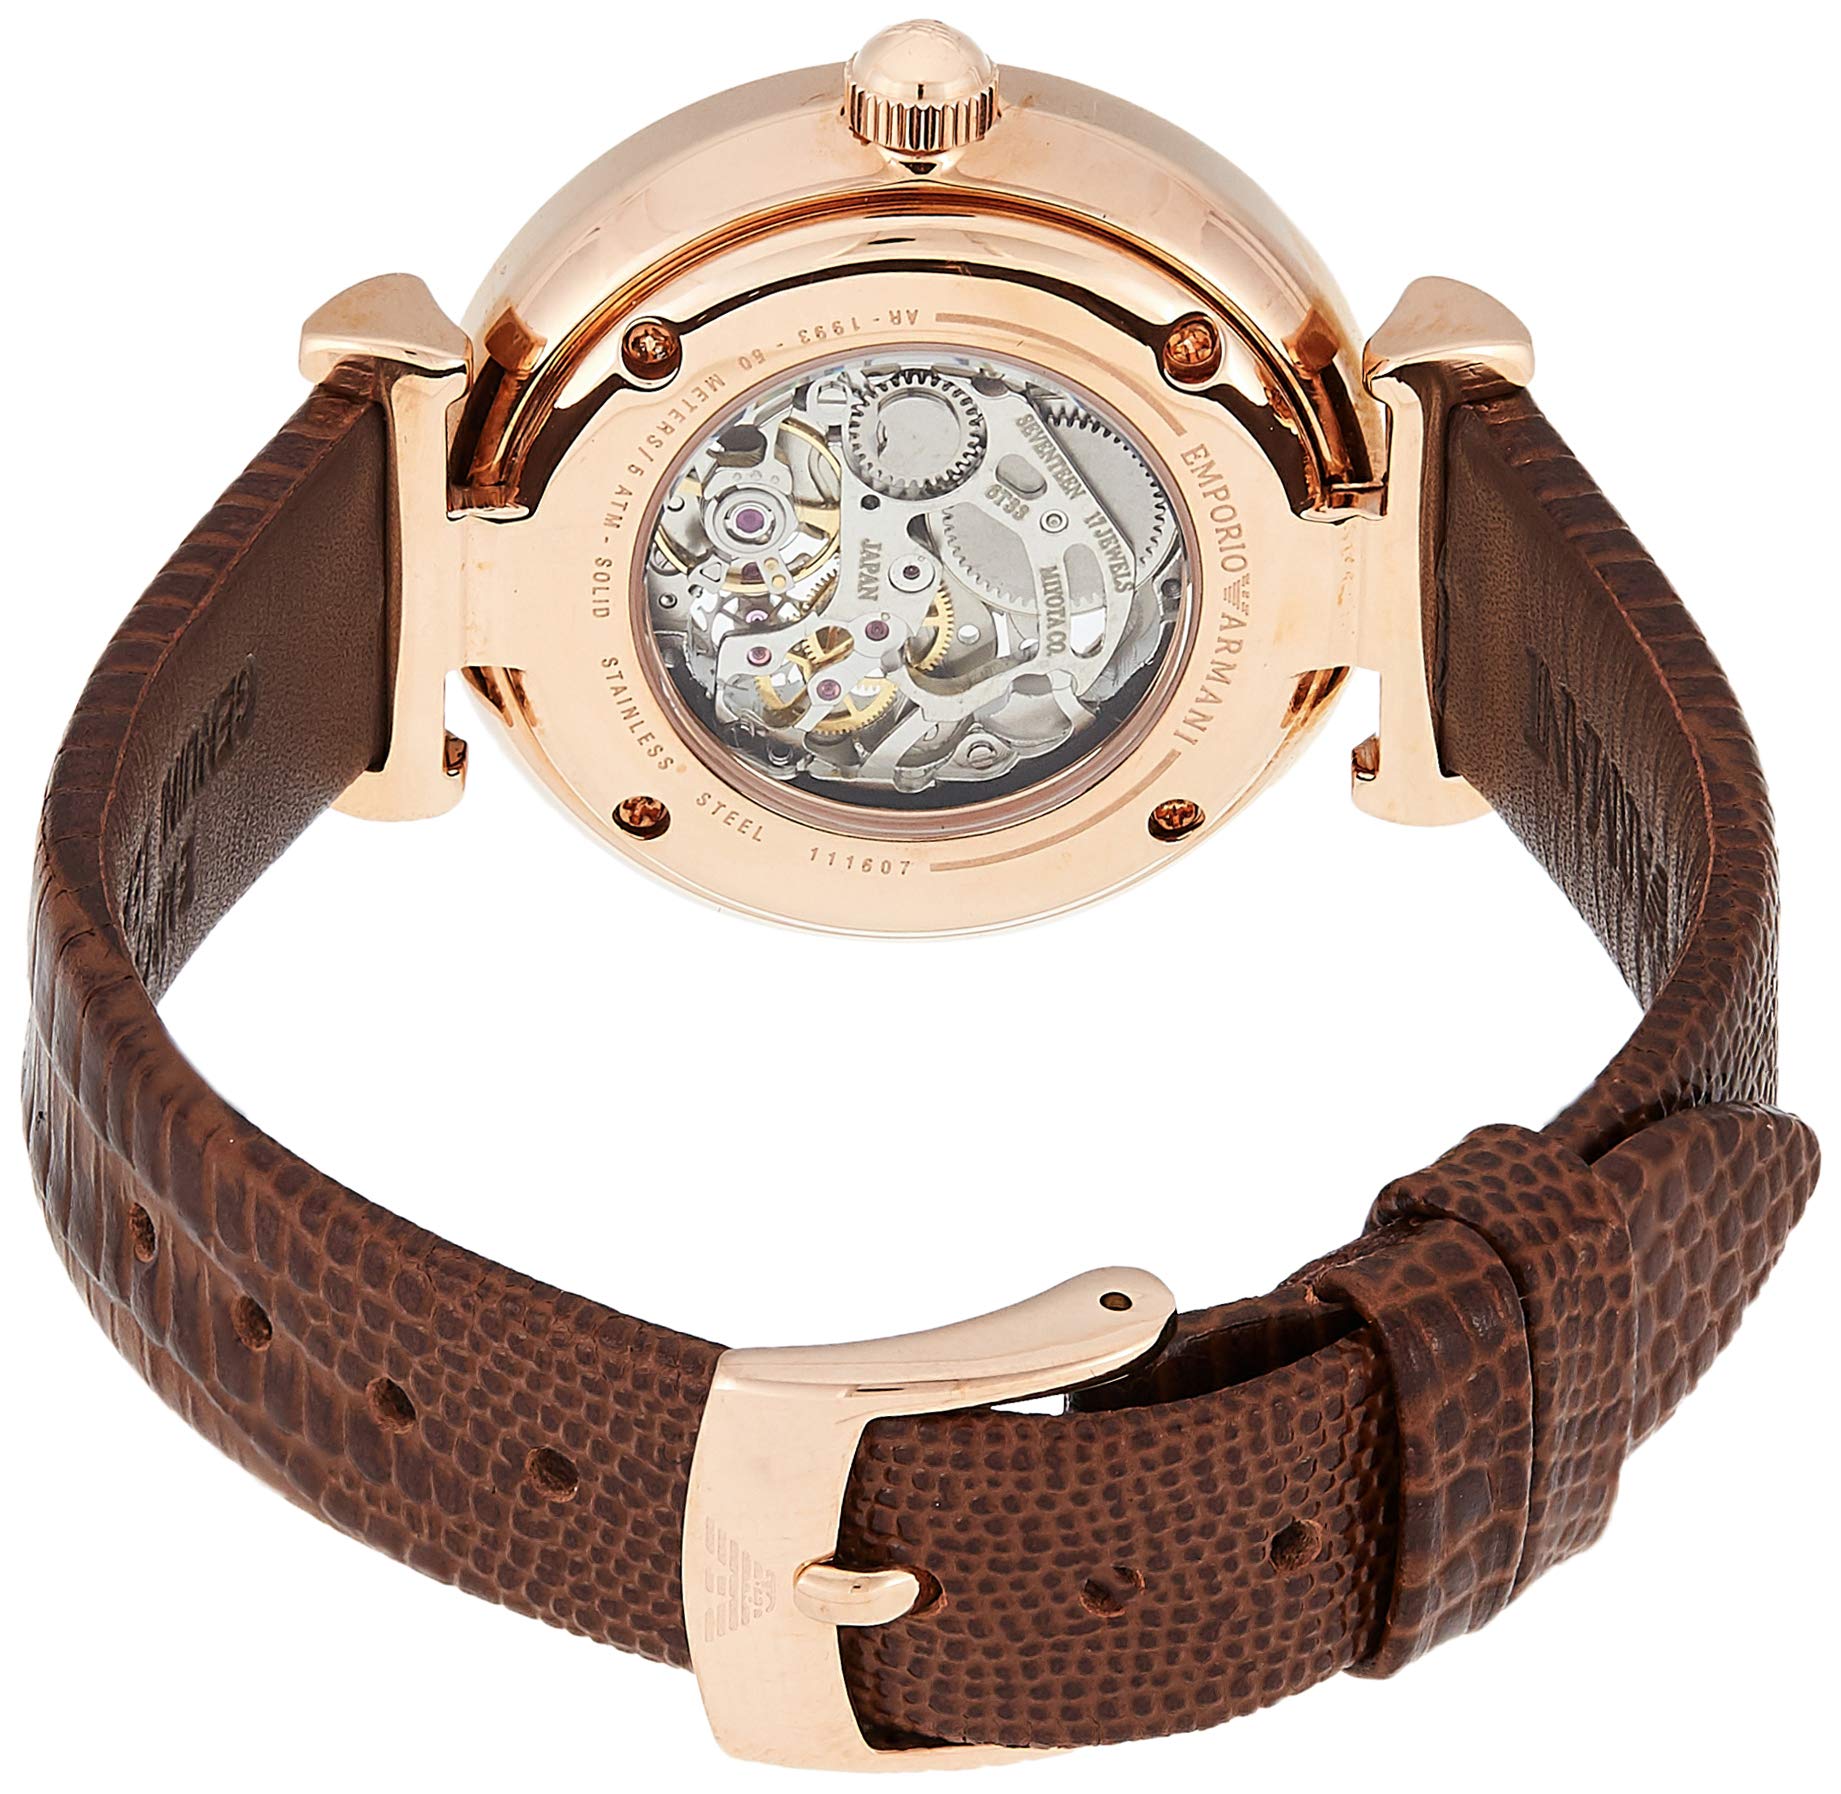 Emporio Armani Meccanico Mother of Pearl Skeleton Dial Brown Leather Strap Watch For Women - AR1993